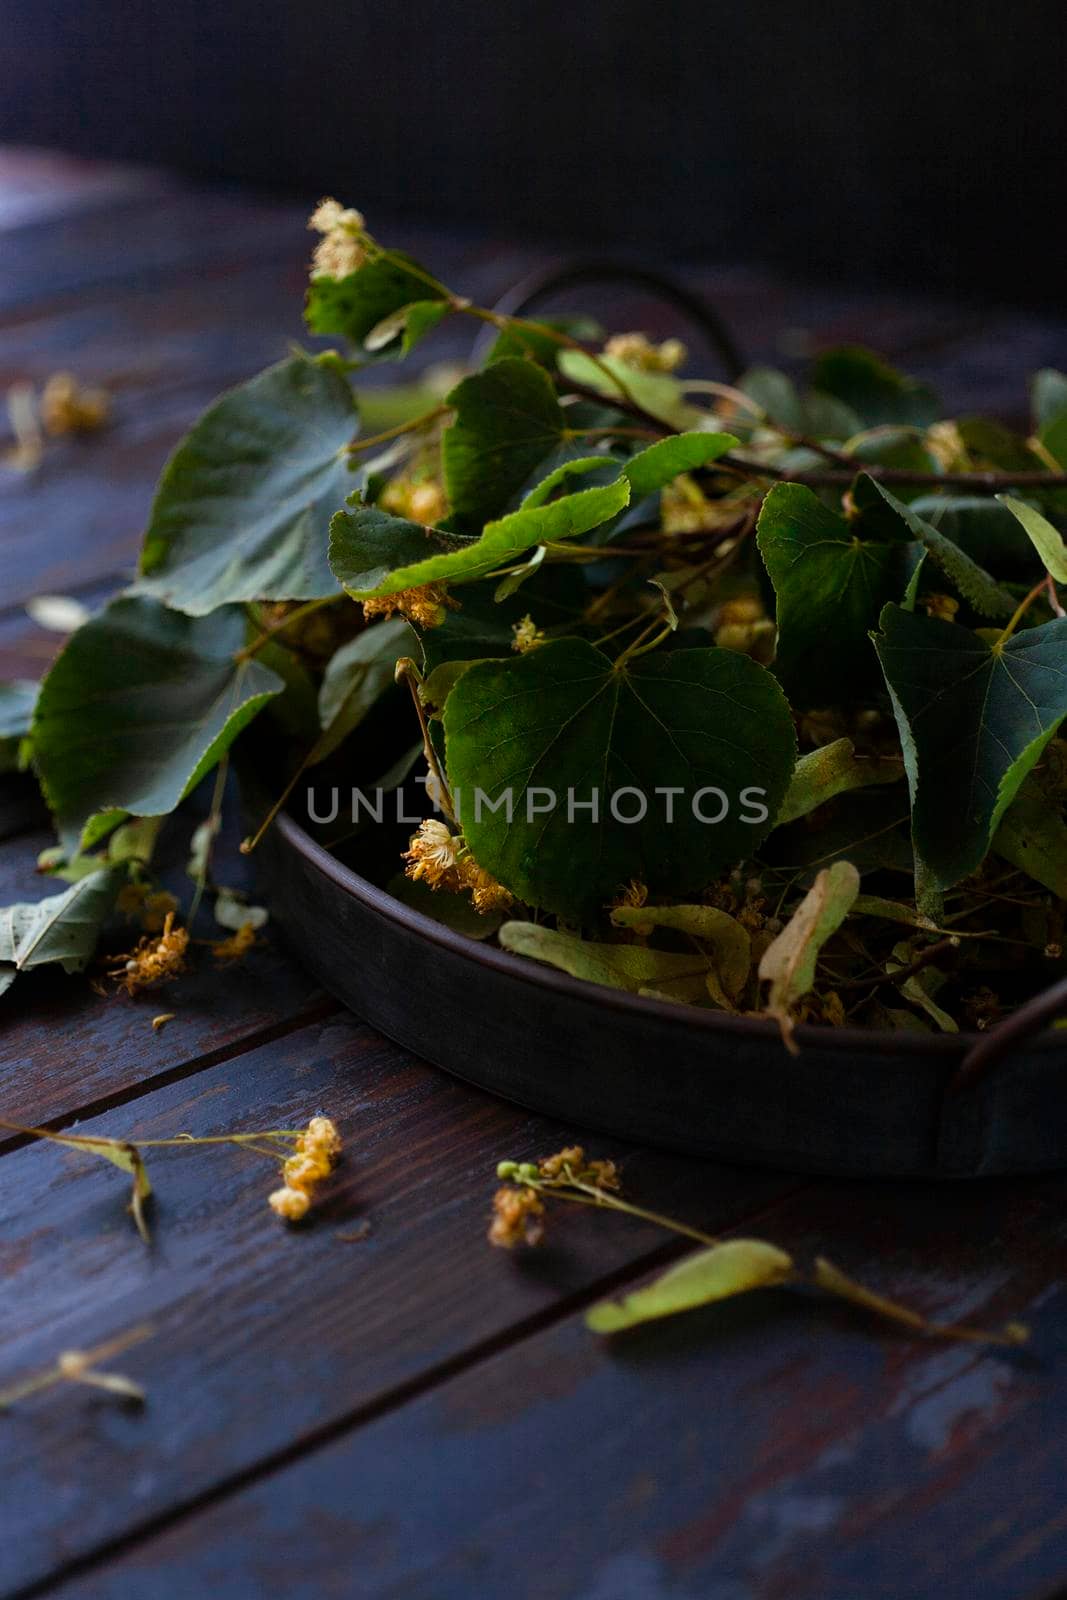 Fresh harvested flowers and leaves of linden tree in vintage metal tray on blue wooden table, low key, selective focus.